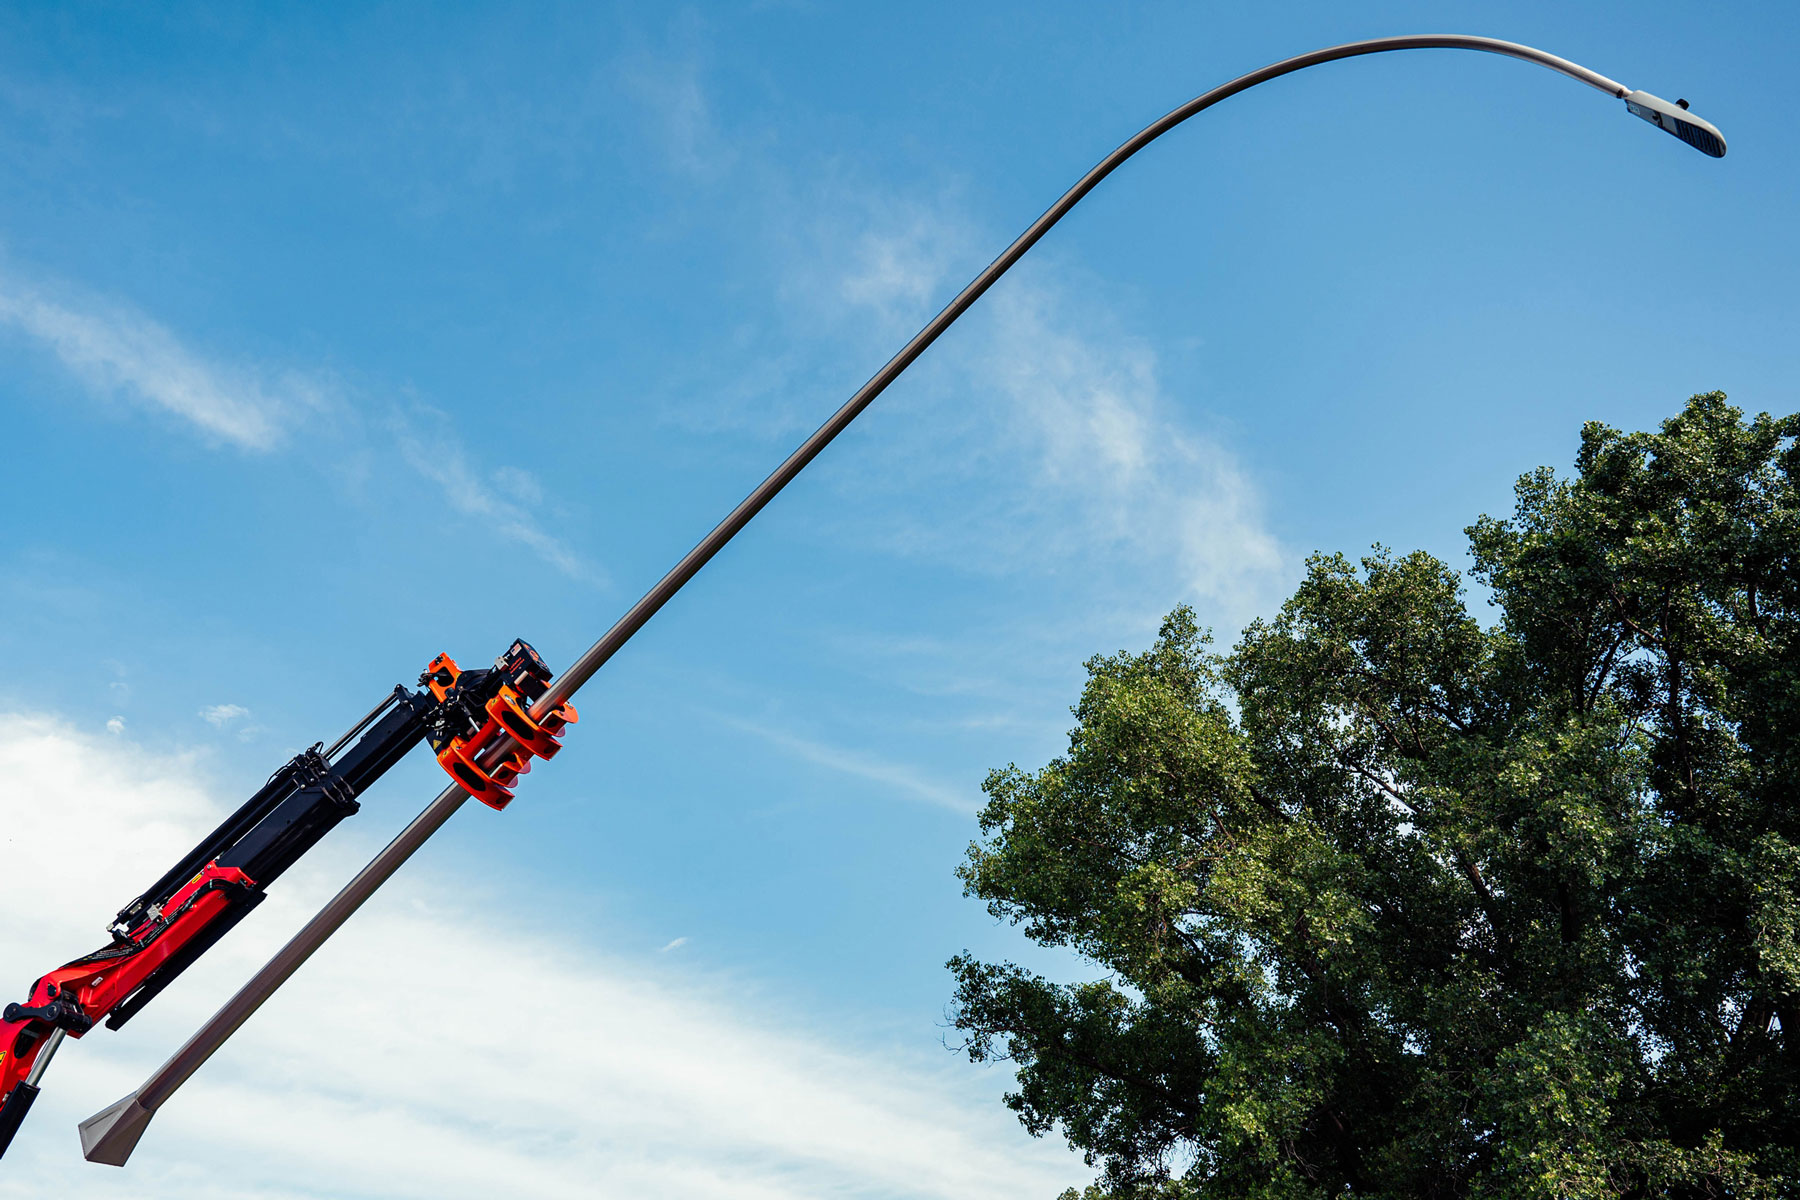 The PM1000™ pole grapple is pictured attached to a crane truck. It is gripping a large, curved light pole during placement for installing on an anchor. There is a large tree in the lower right corner.